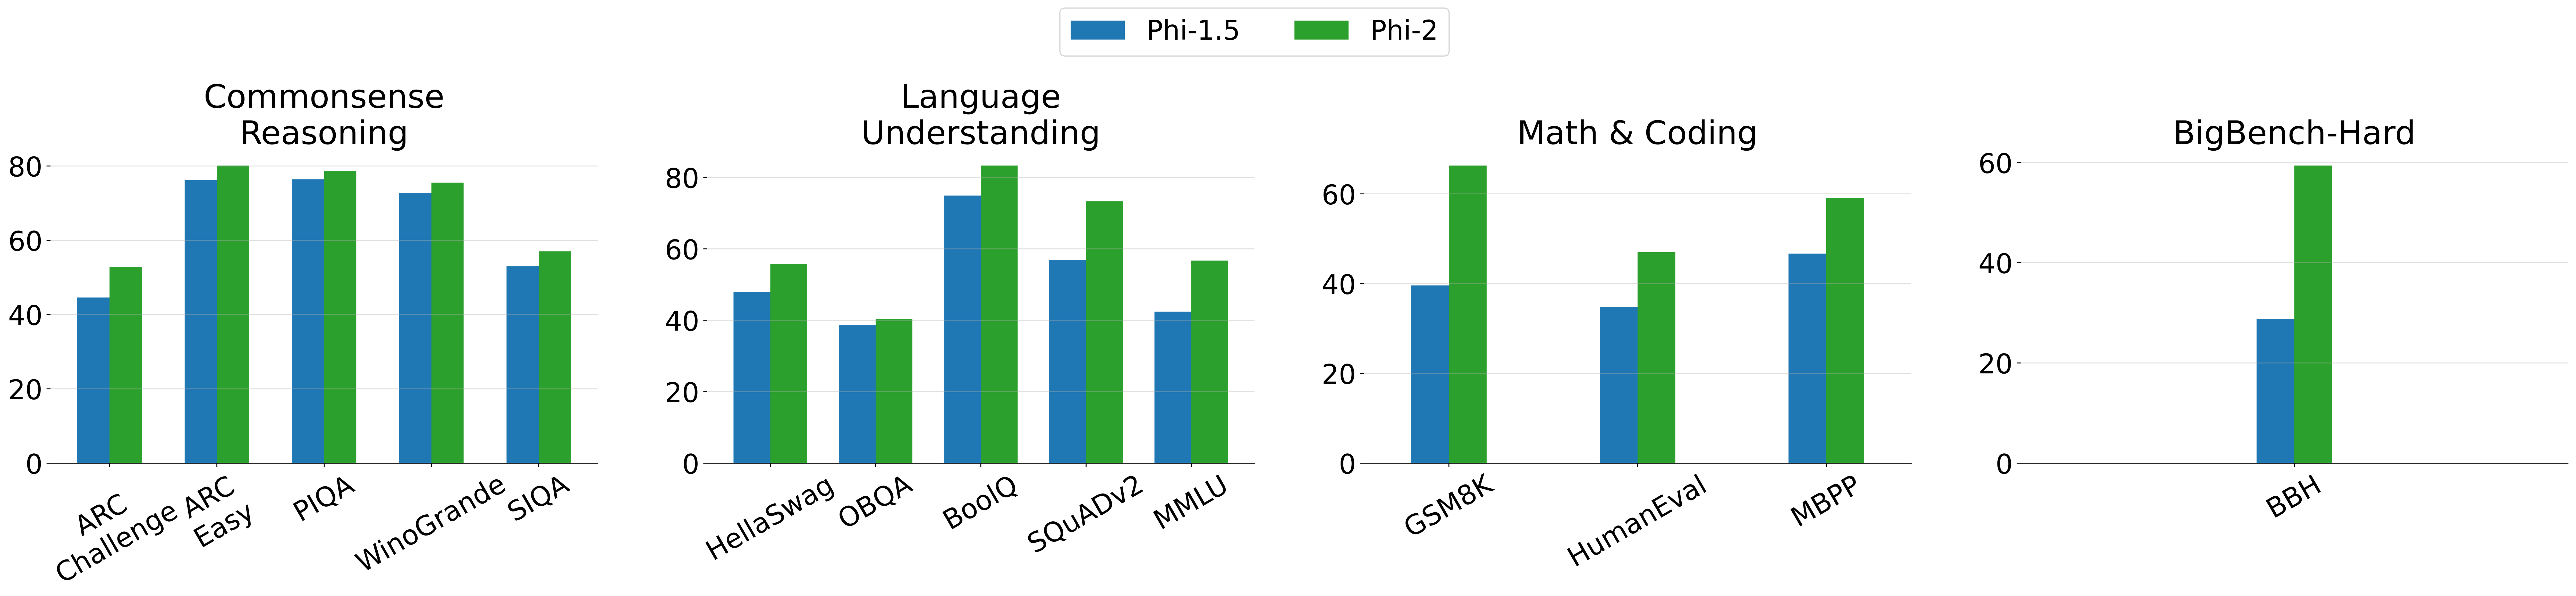 A bar plot comparing the performance of Phi-2 (with 2.7B parameters) and Phi-1.5 (with 1.3B parameters) on common sense reasoning, language understanding, math, coding, and the Bigbench-hard benchmark. Phi-2 outperforms Phi1.5 in all categories. The commonsense reasoning tasks are PIQA, WinoGrande, ARC easy and challenge, and SIQA. The language understanding tasks are HellaSwag, OpenBookQA, MMLU, SQuADv2, and BoolQ. The math task is GSM8k, and coding includes the HumanEval and MBPP benchmarks. 